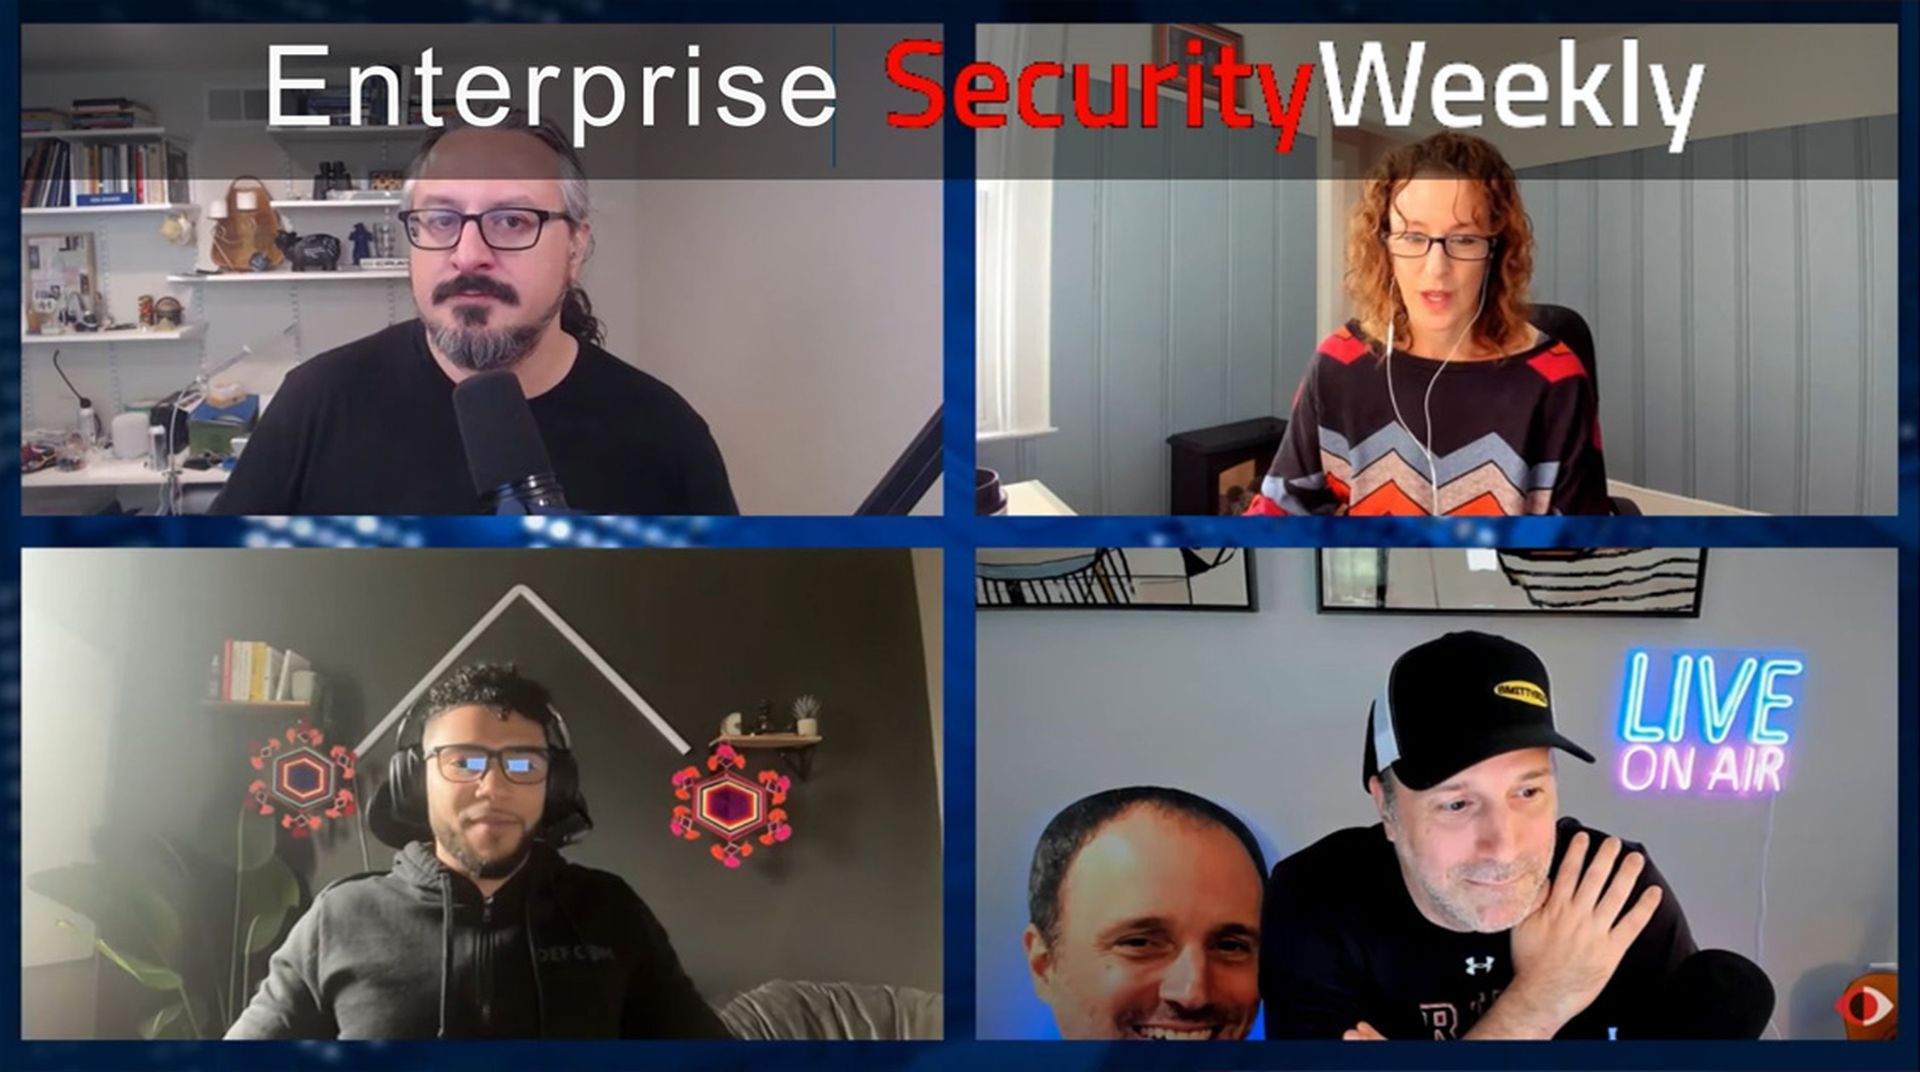 An Enterprise Security Weekly Roundtable on trusting autonomous security products to protect and serve - no humans need apply.